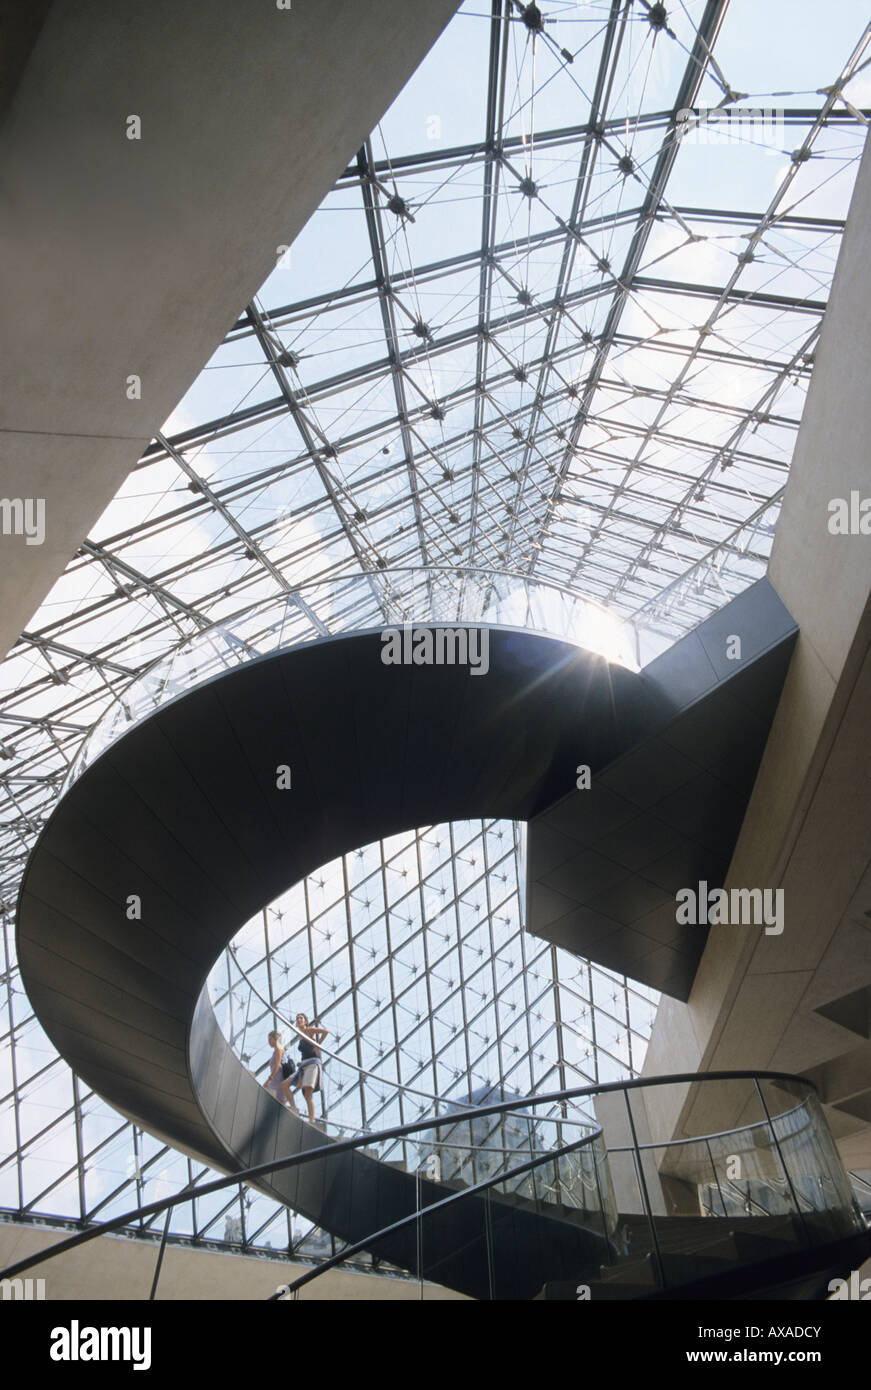 Patrons walk up interior stairs of Glass Pyramid in Louvre Paris France Stock Photo